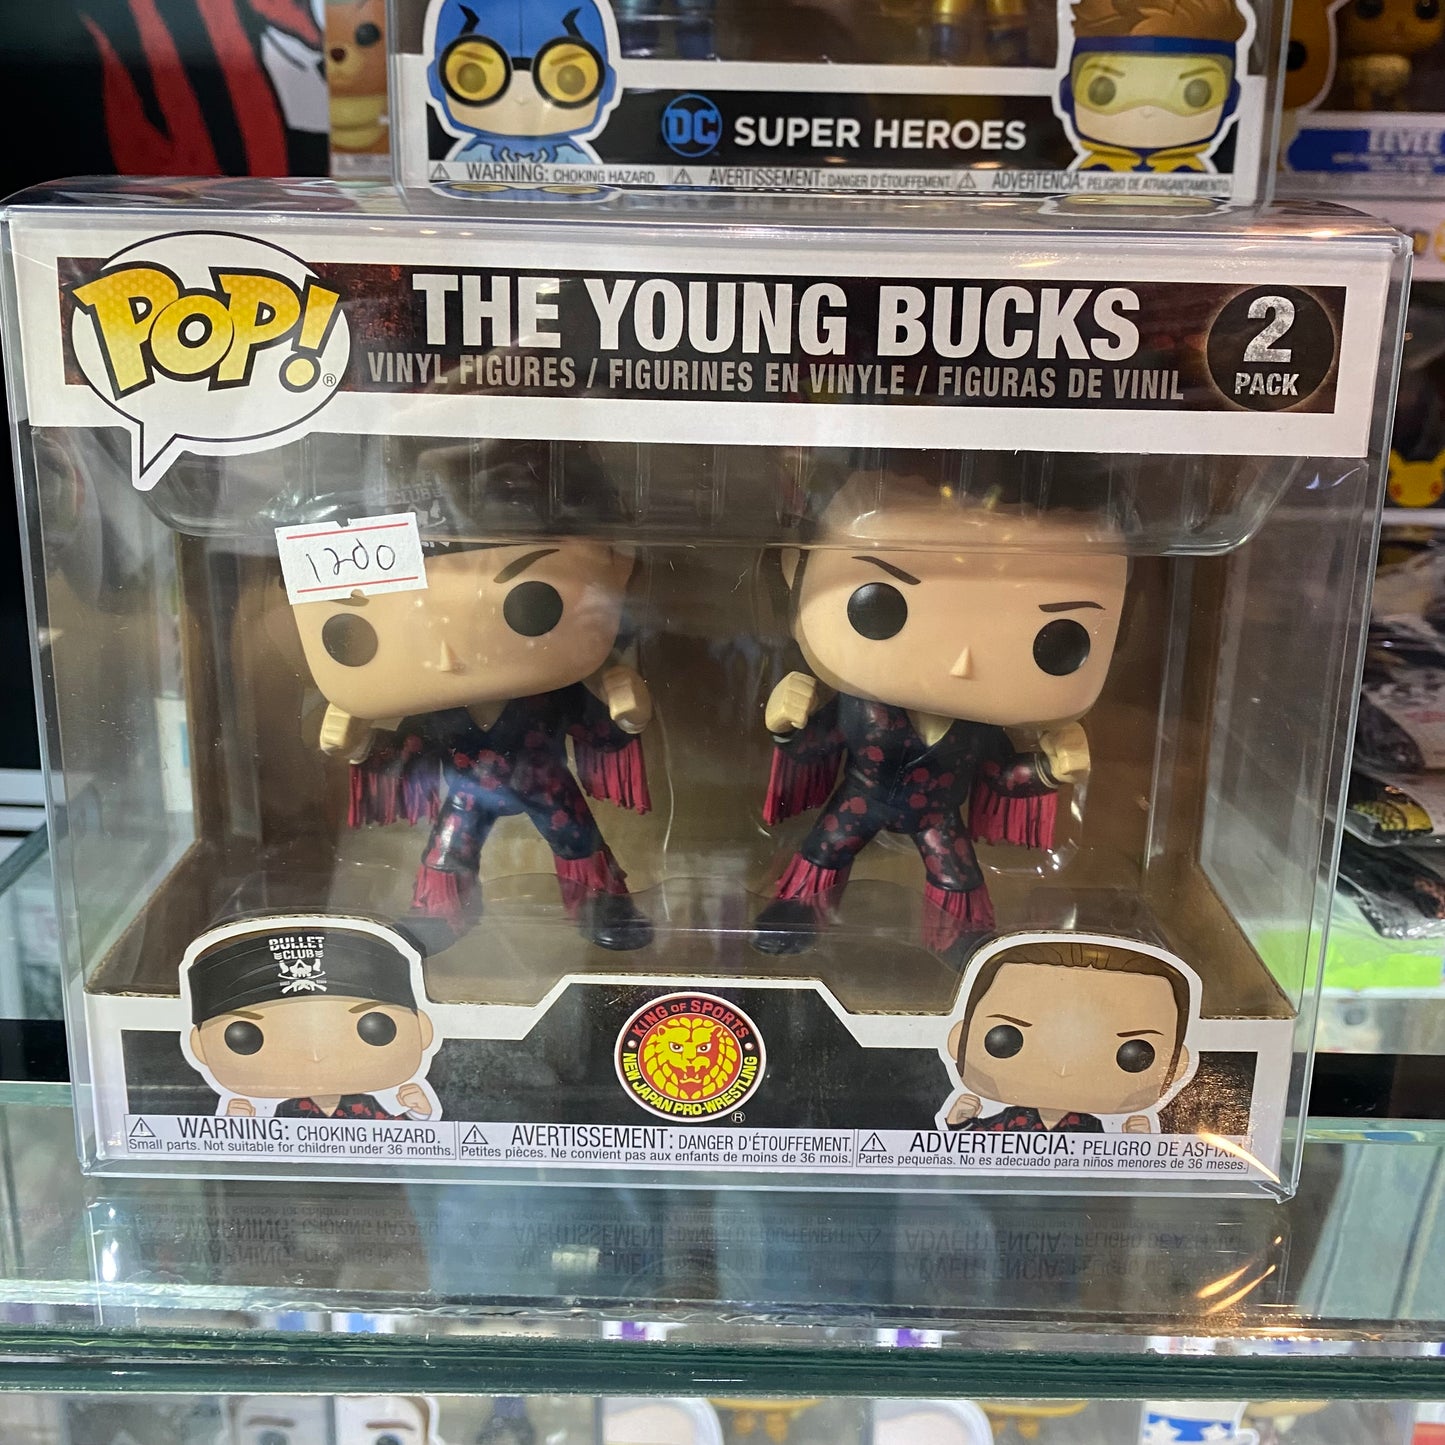 On Hand The Young Bucks 2 Pack